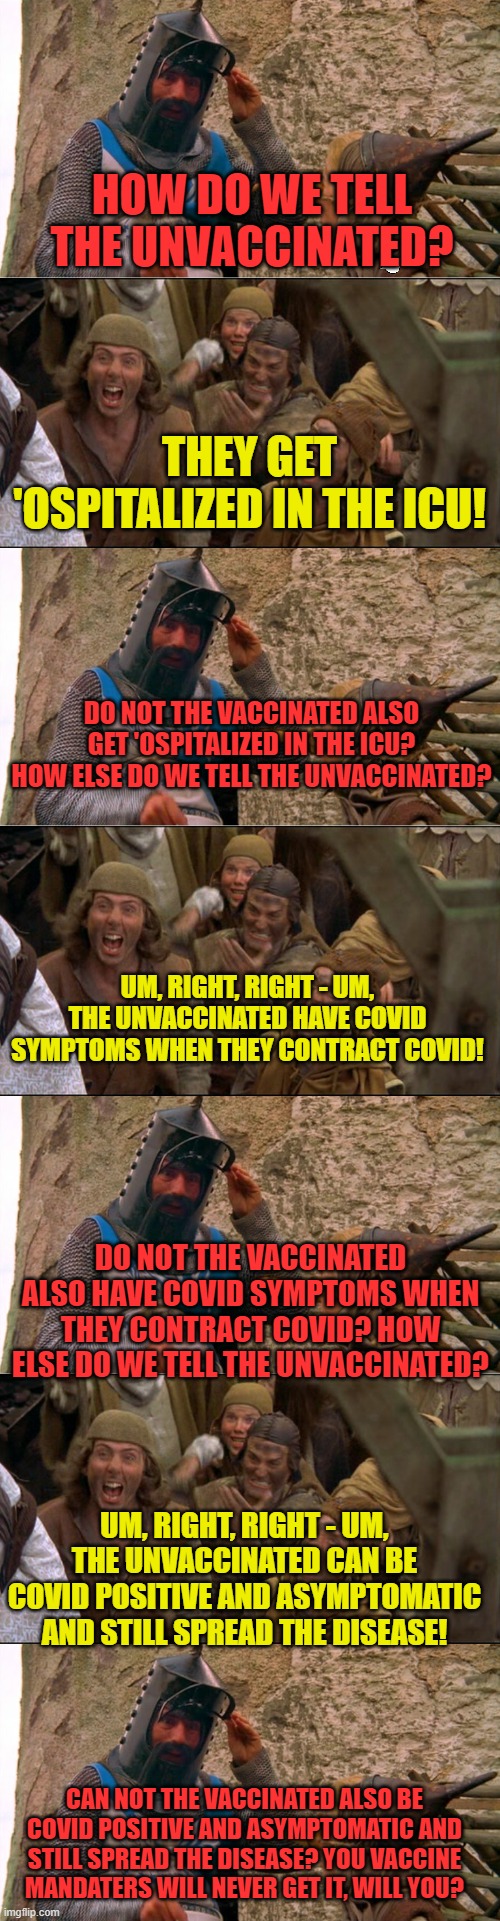 Special thanks for who_am_i for the idea! | HOW DO WE TELL THE UNVACCINATED? THEY GET 'OSPITALIZED IN THE ICU! DO NOT THE VACCINATED ALSO GET 'OSPITALIZED IN THE ICU? HOW ELSE DO WE TELL THE UNVACCINATED? UM, RIGHT, RIGHT - UM, THE UNVACCINATED HAVE COVID SYMPTOMS WHEN THEY CONTRACT COVID! DO NOT THE VACCINATED ALSO HAVE COVID SYMPTOMS WHEN THEY CONTRACT COVID? HOW ELSE DO WE TELL THE UNVACCINATED? UM, RIGHT, RIGHT - UM, THE UNVACCINATED CAN BE COVID POSITIVE AND ASYMPTOMATIC AND STILL SPREAD THE DISEASE! CAN NOT THE VACCINATED ALSO BE COVID POSITIVE AND ASYMPTOMATIC AND STILL SPREAD THE DISEASE? YOU VACCINE MANDATERS WILL NEVER GET IT, WILL YOU? | image tagged in burn the witch,covid,vaccine,mandate | made w/ Imgflip meme maker